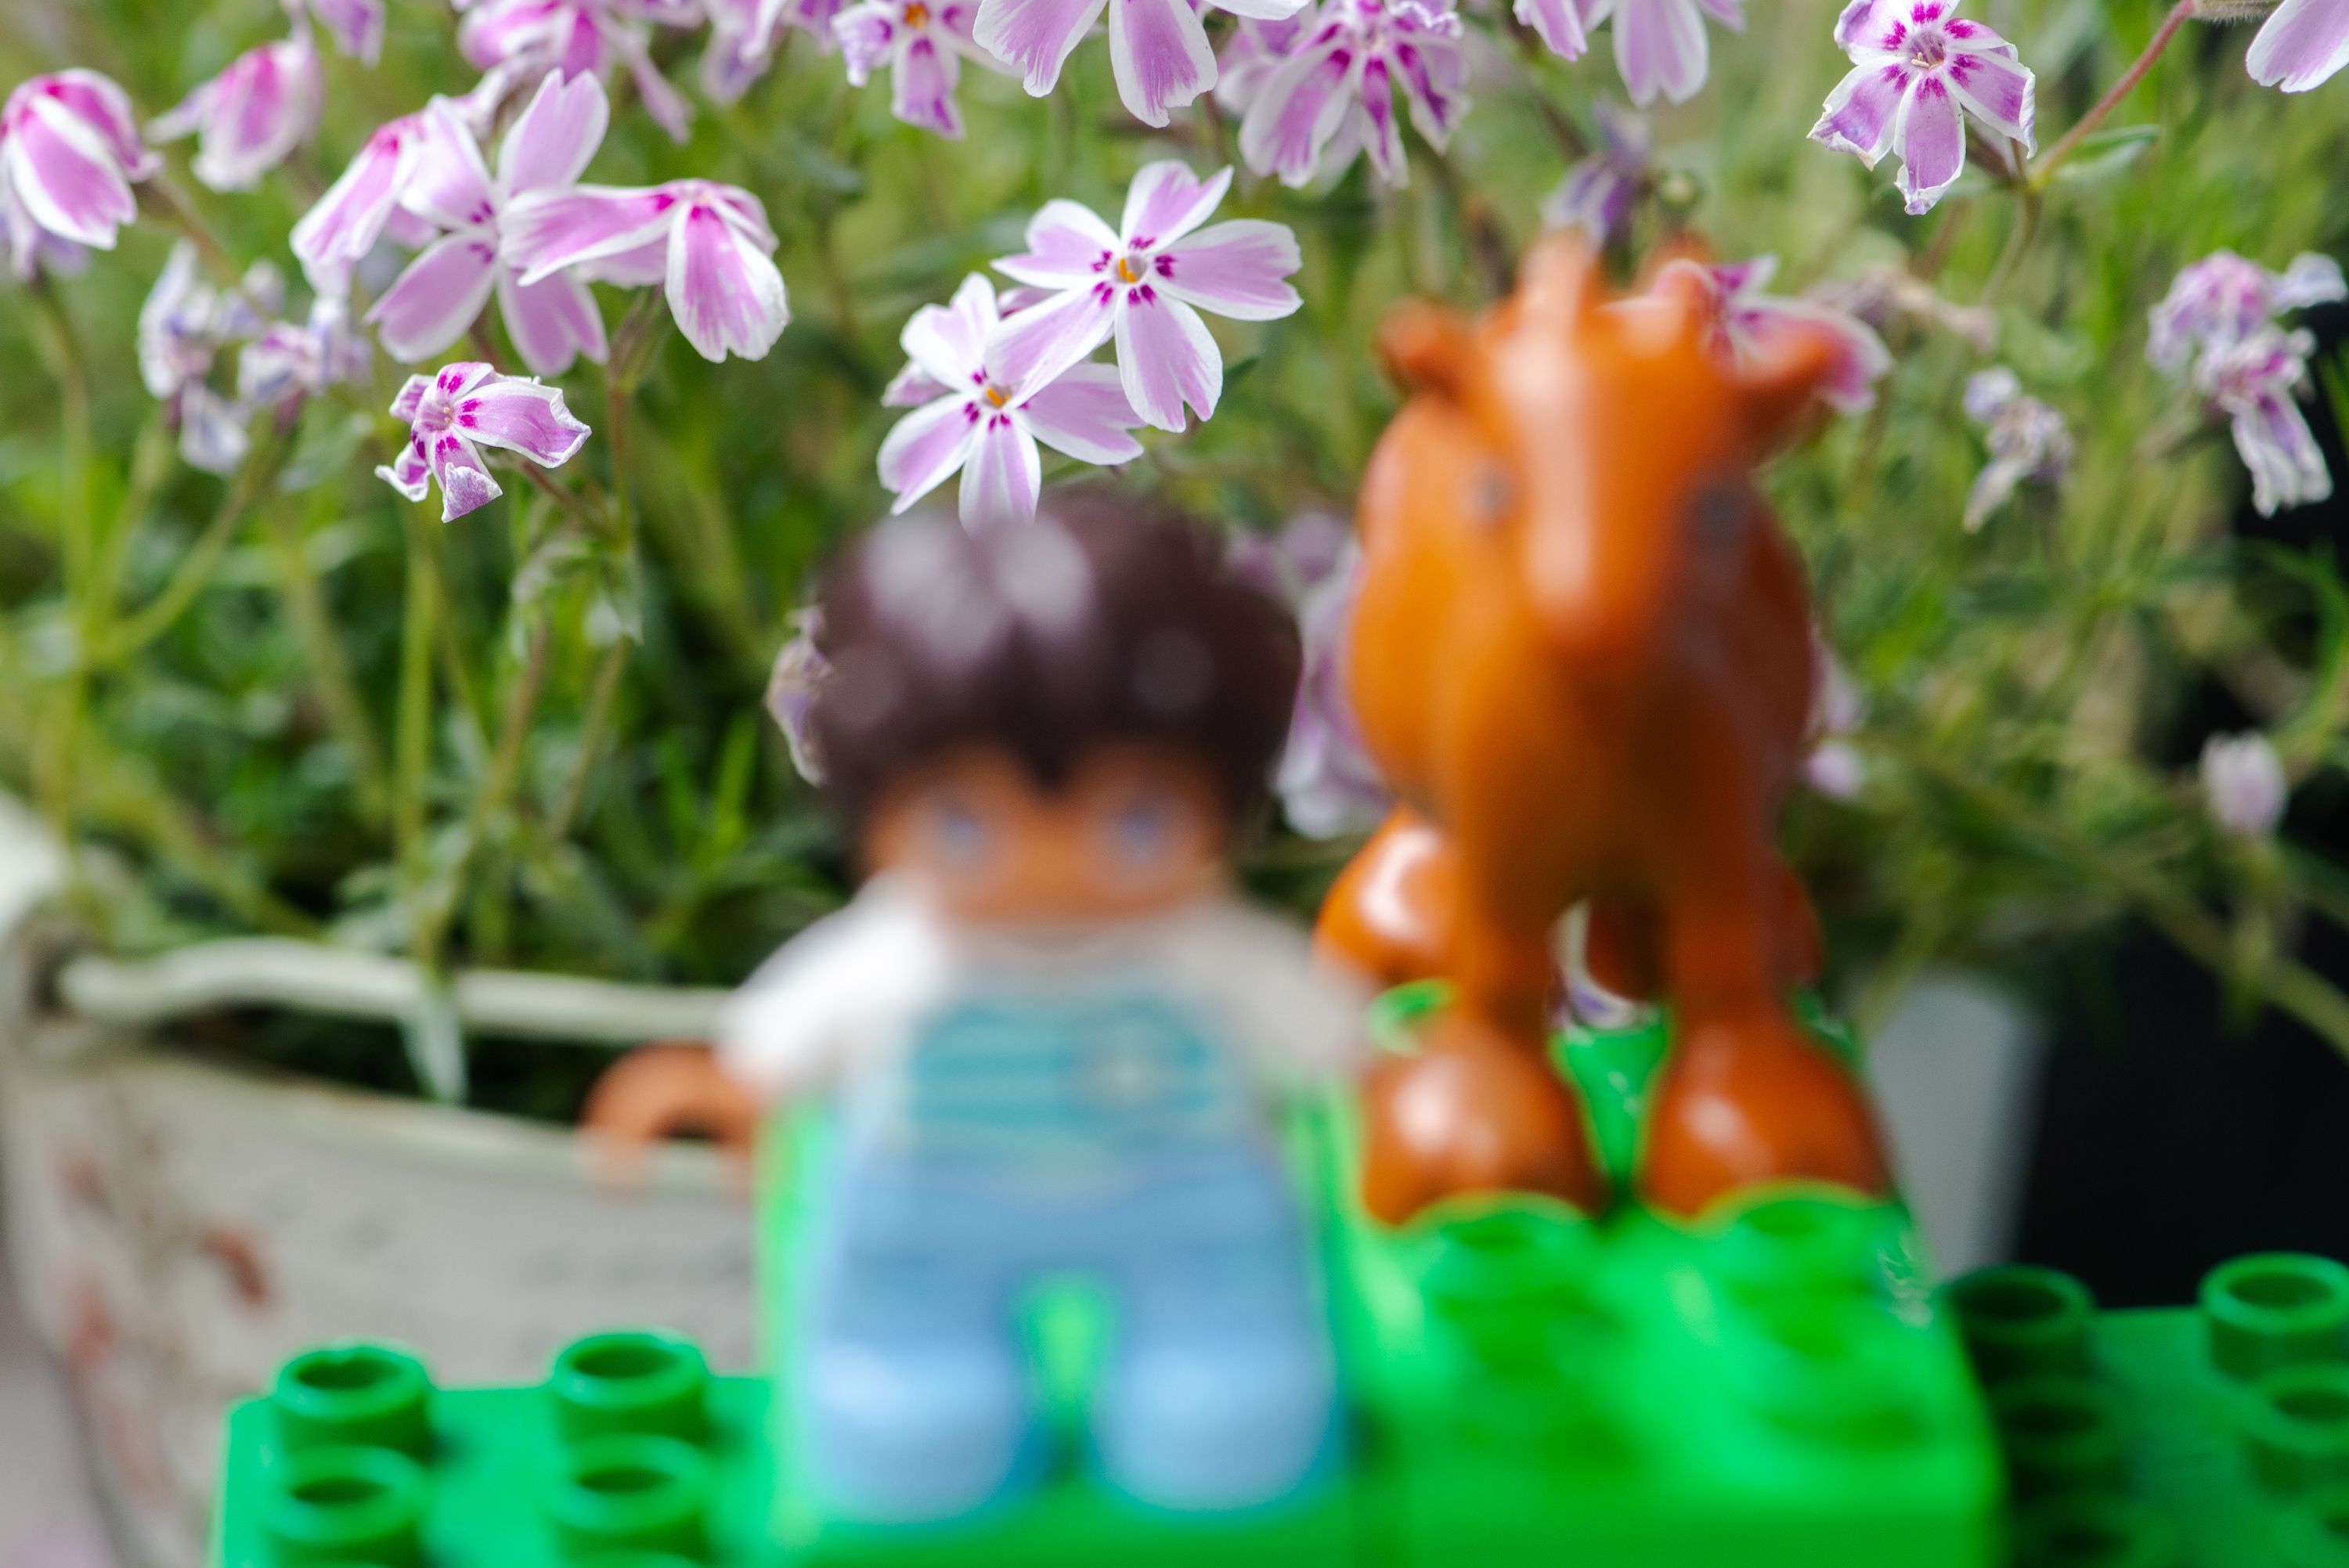 Lego Duplo child mini figure with a goat with flowers in the background - Out of focus image